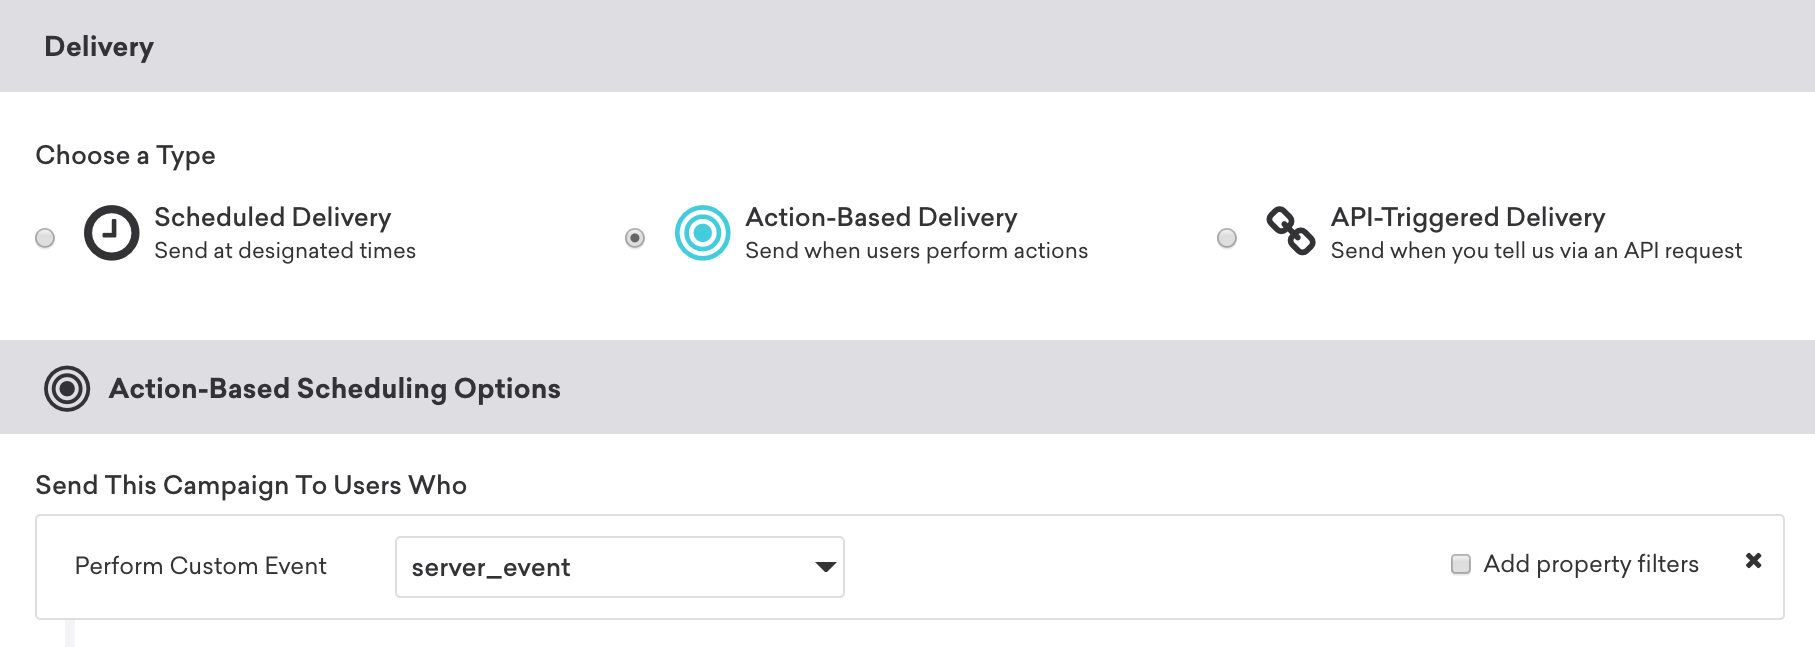 An action-based delivery in-app message campaign that will be delivered to users whose user profiles have the custom event "server_event".